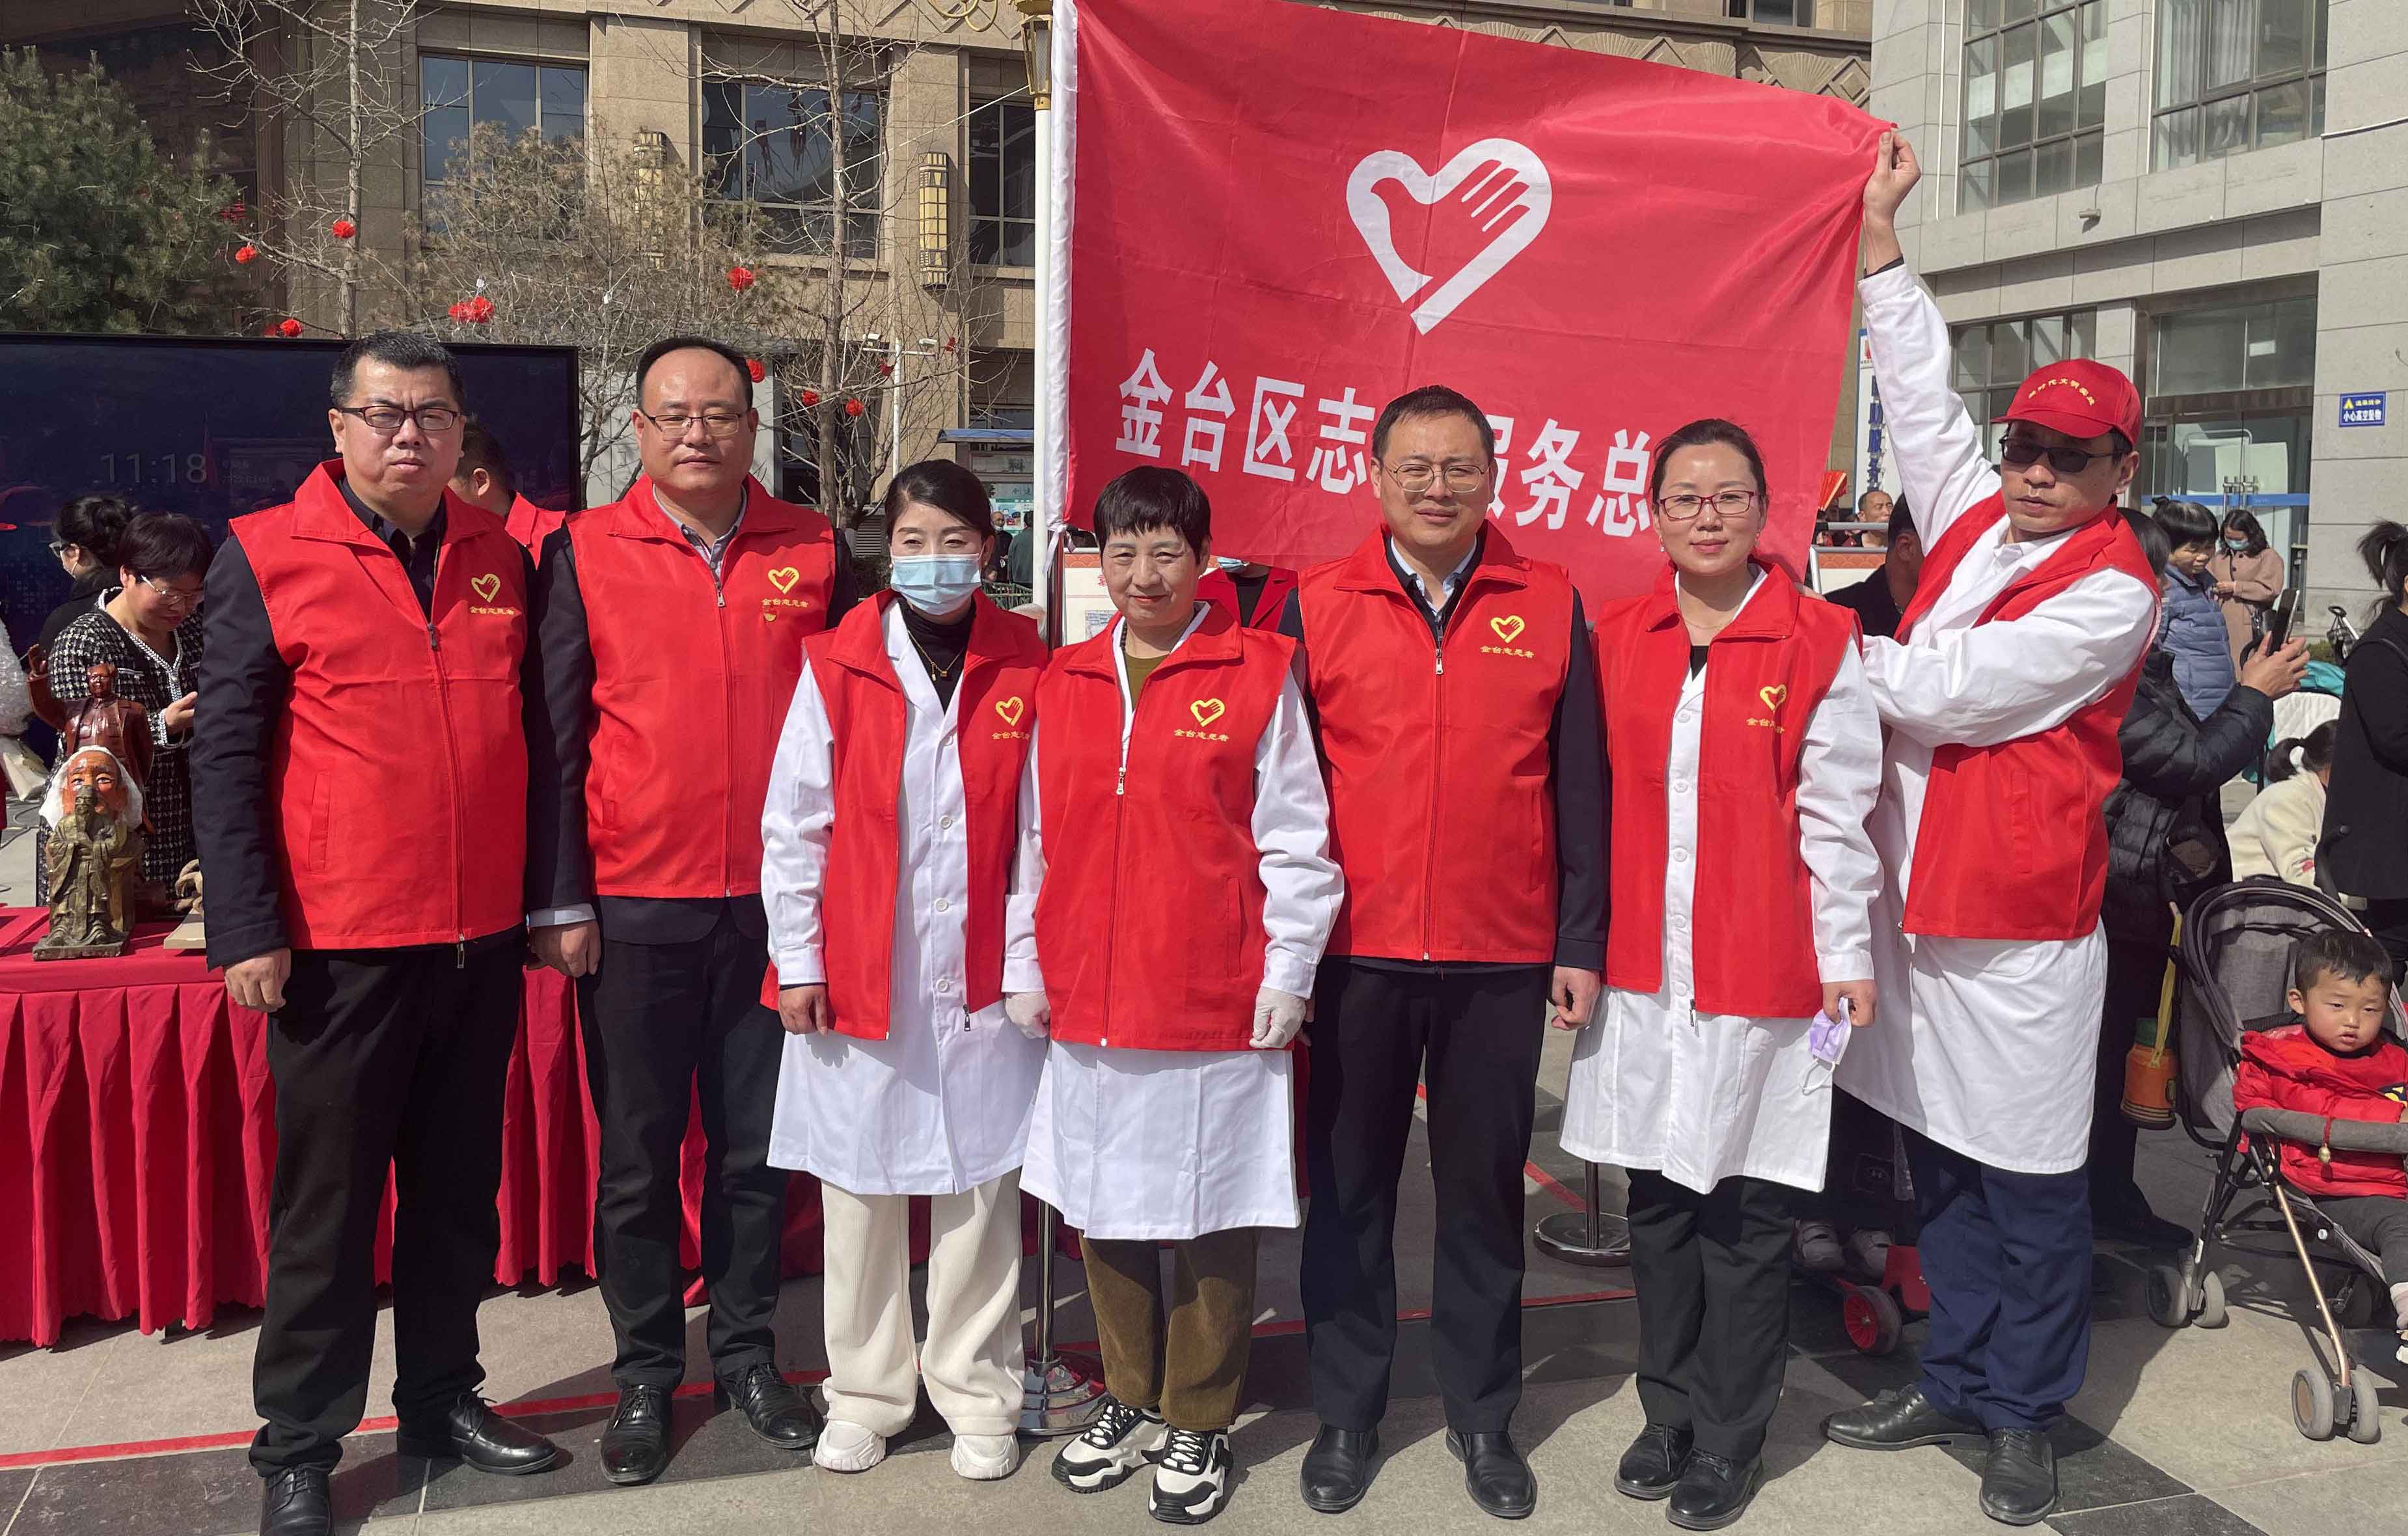  Yuan Yinhong, the inheritor of intangible cultural heritage, was invited to participate in the volunteer service activity of learning from Lei Feng in Baoji